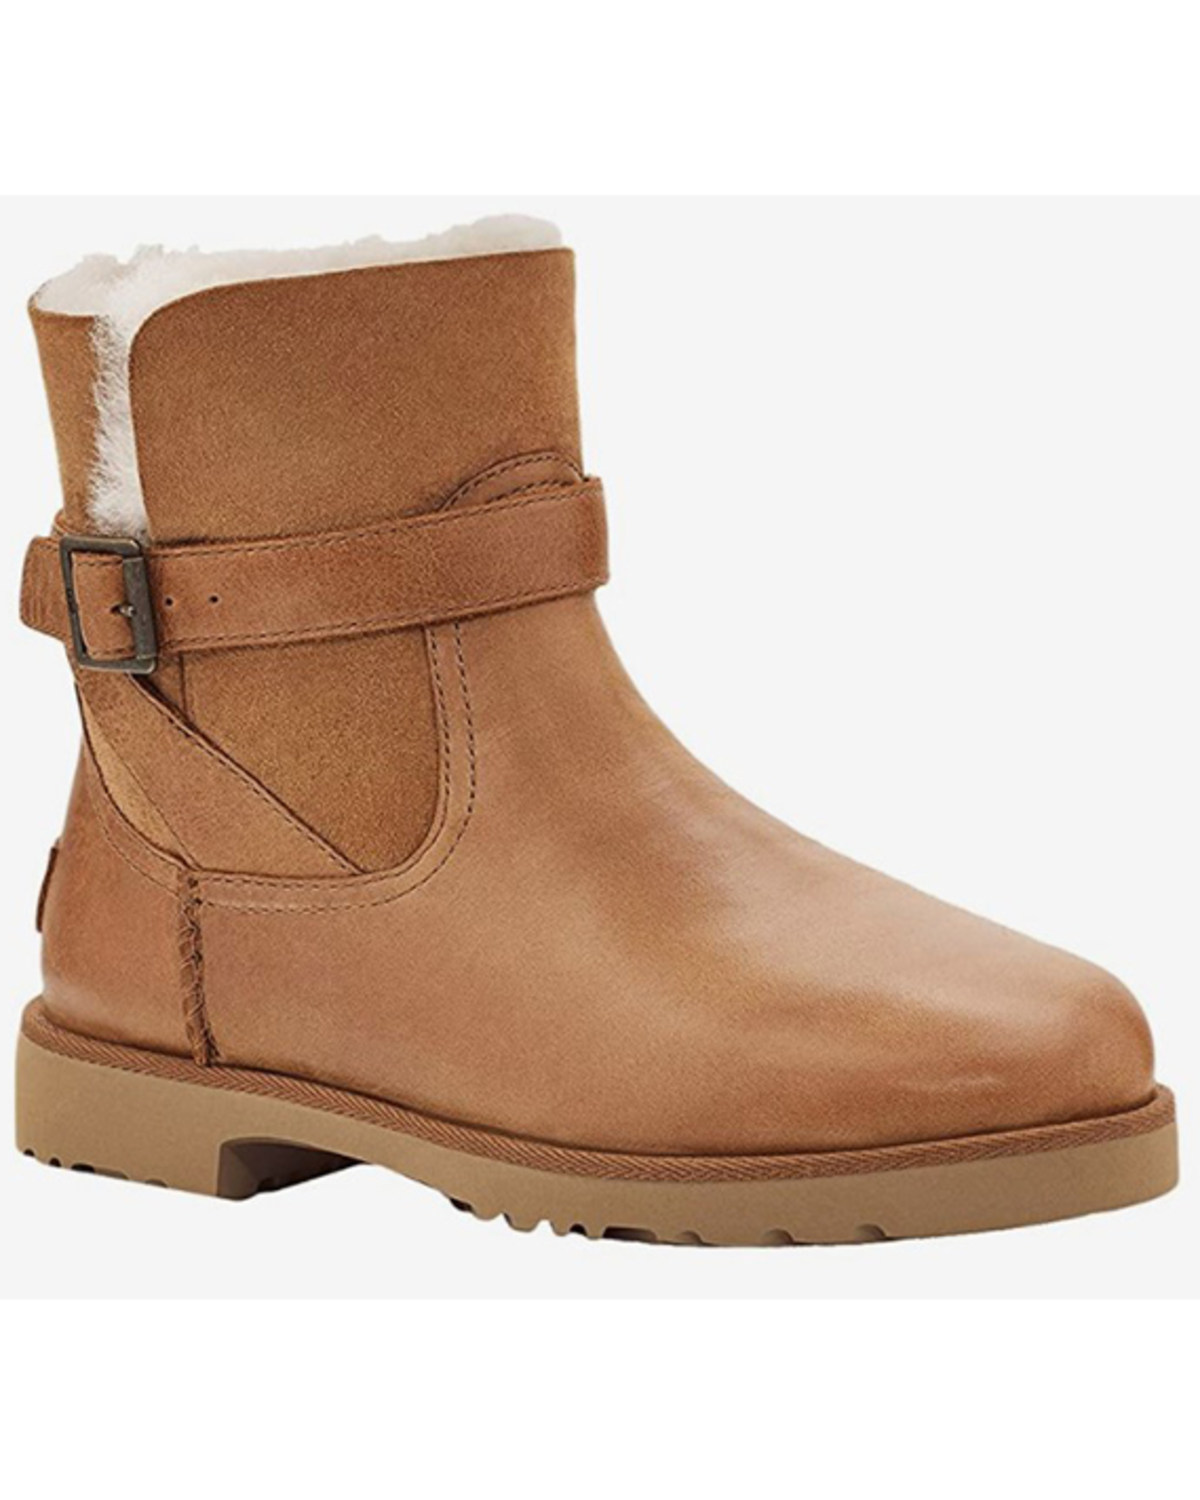 UGG Women's Romely Buckle Boots - Round Toe